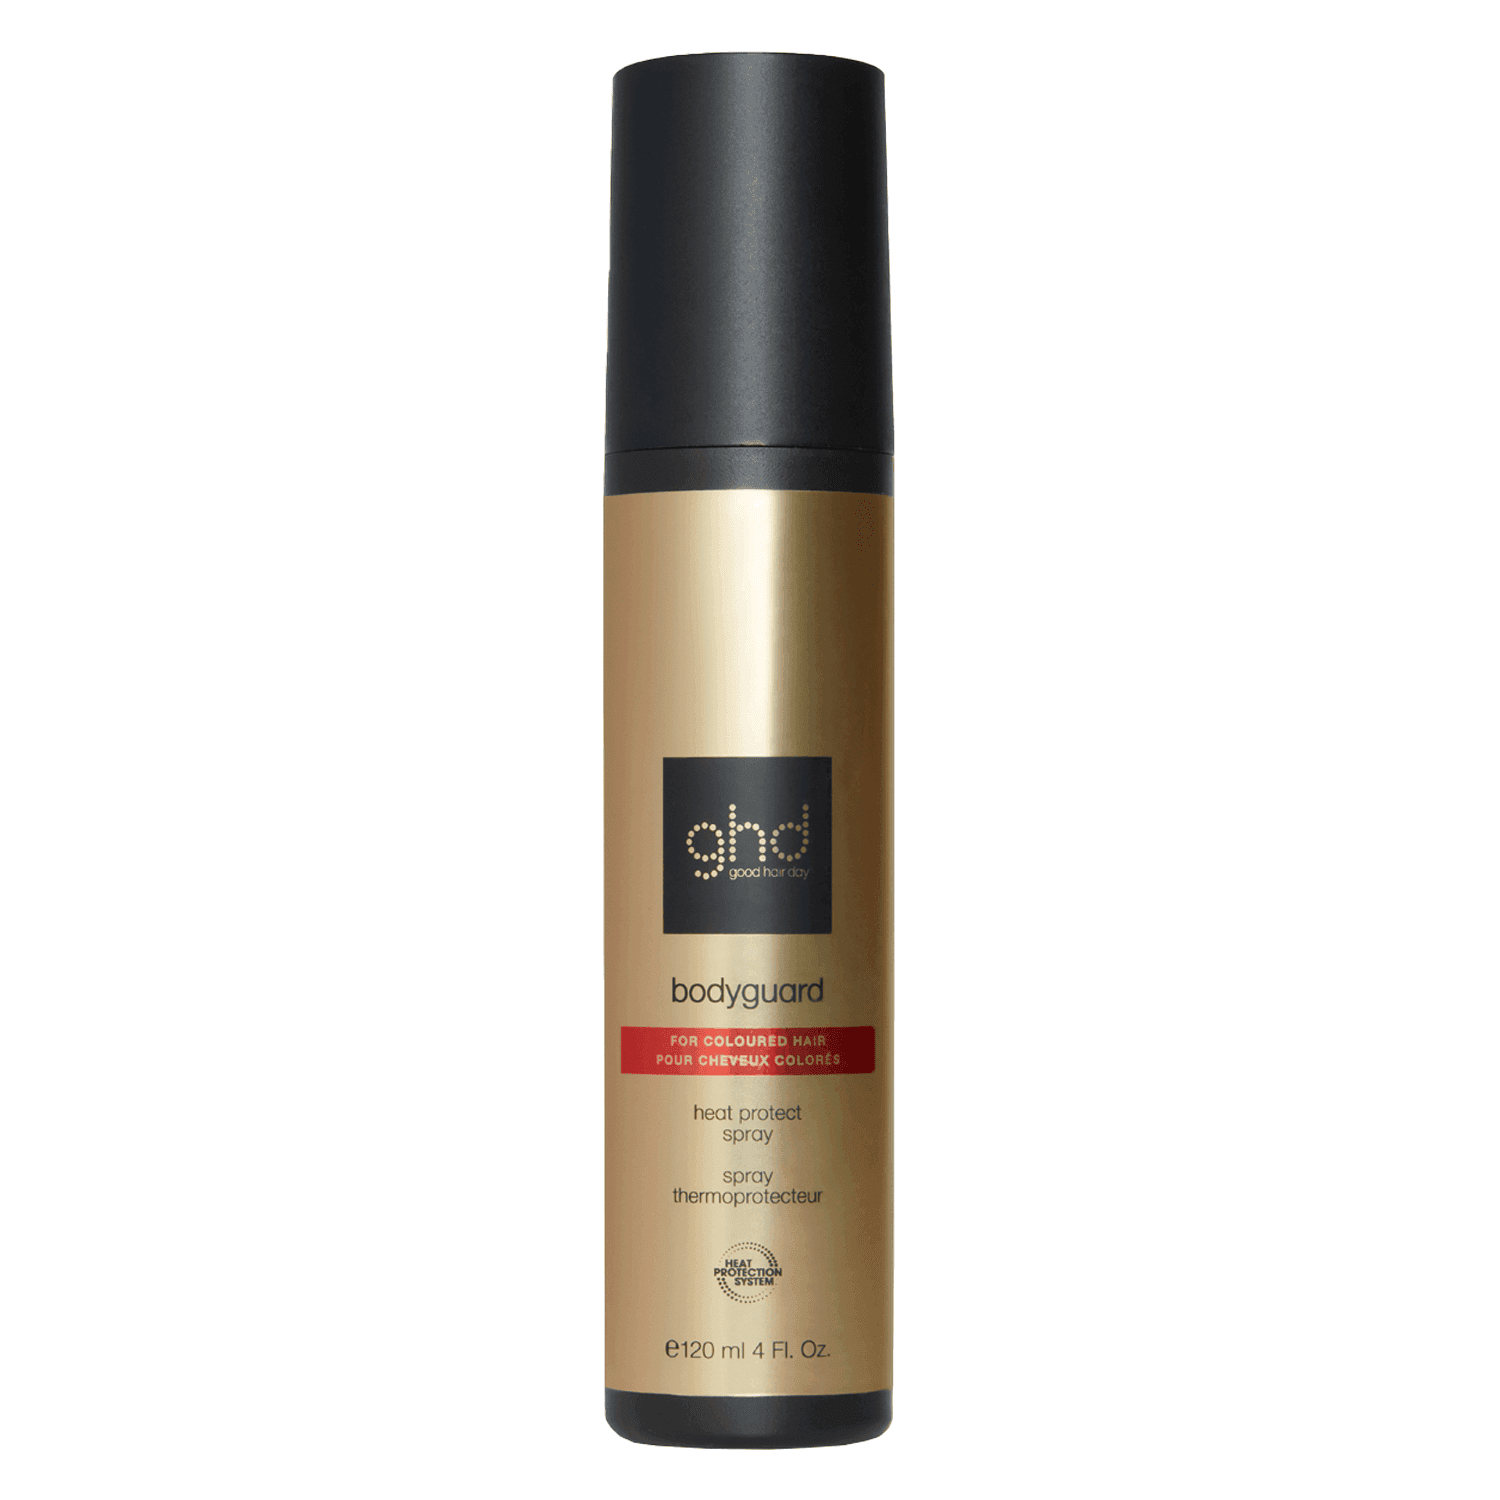 ghd Heat Protection Styling System - Bodyguard Heat Protect Spray for Coloured Hair